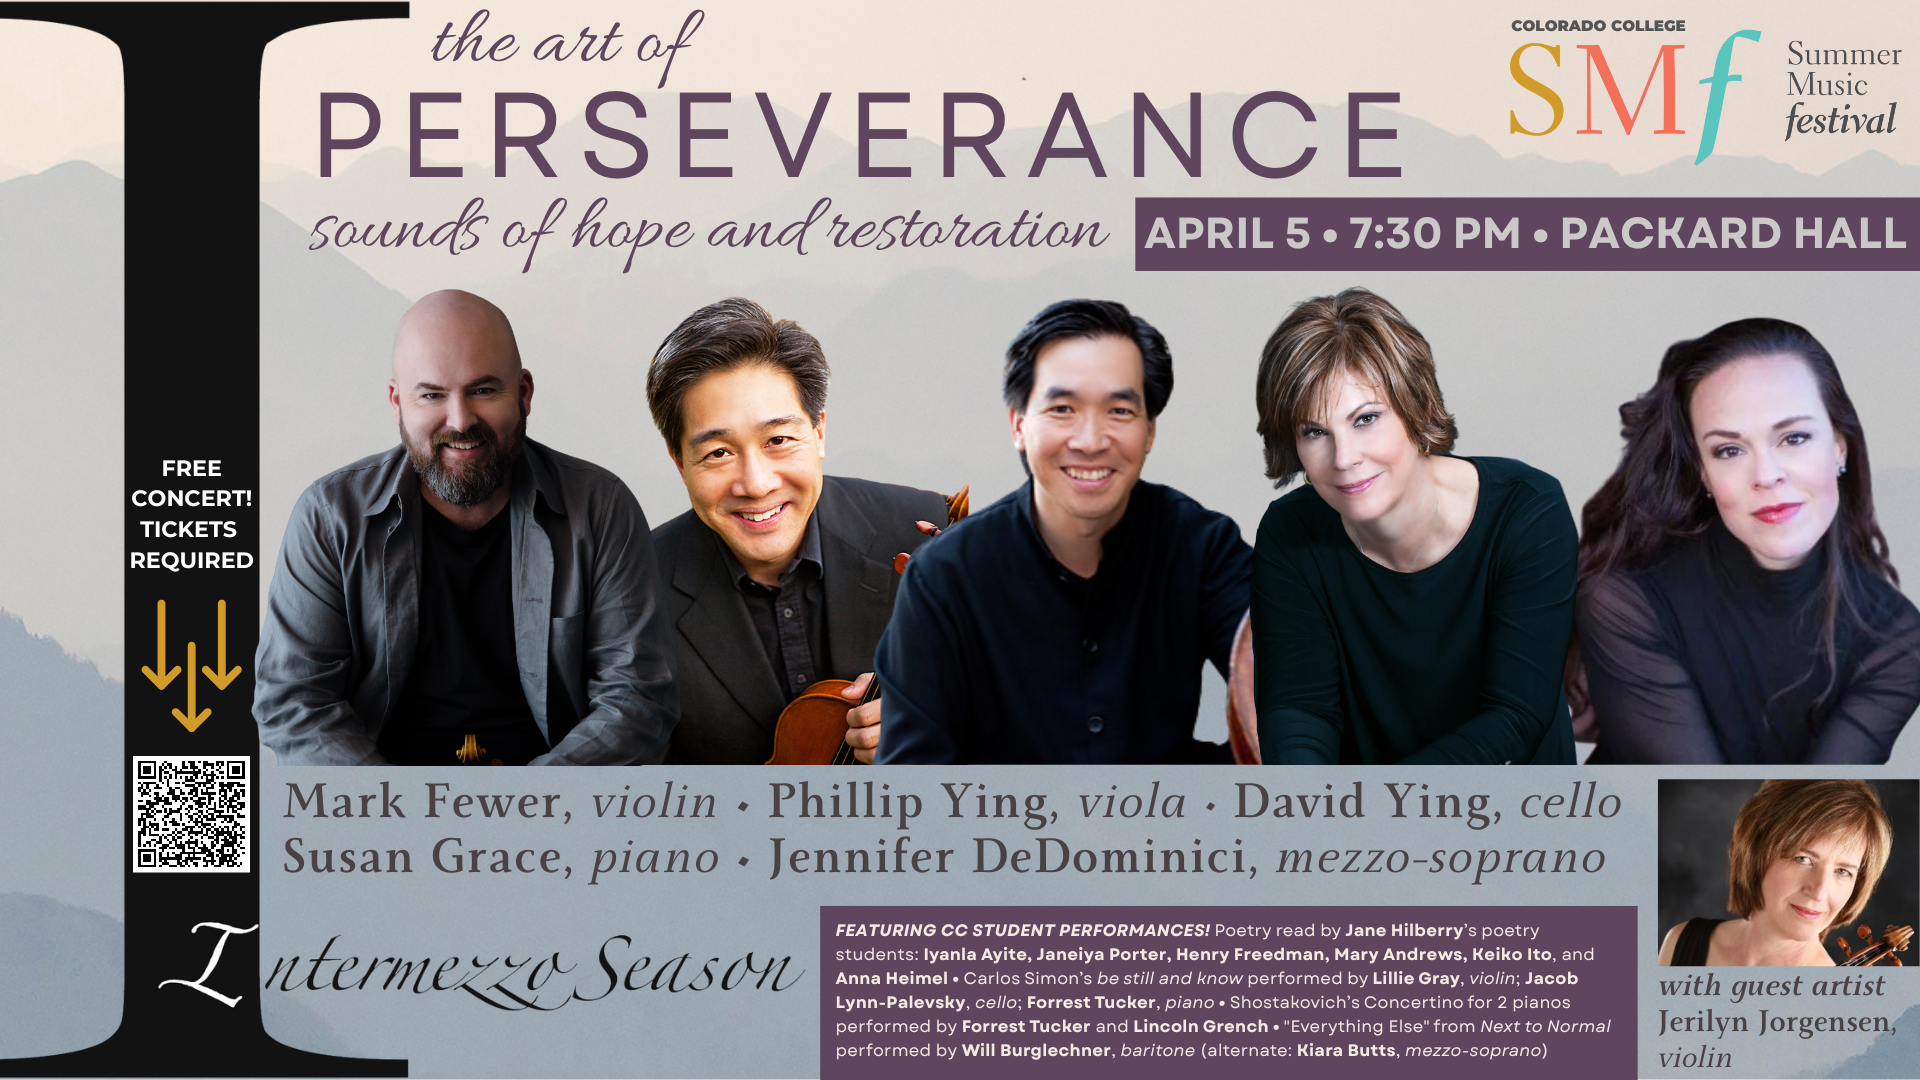 "The Art of Perseverance: Sounds of Hope and Restoration" begins at 7:30 p.m. April 5 in Packard Hall.